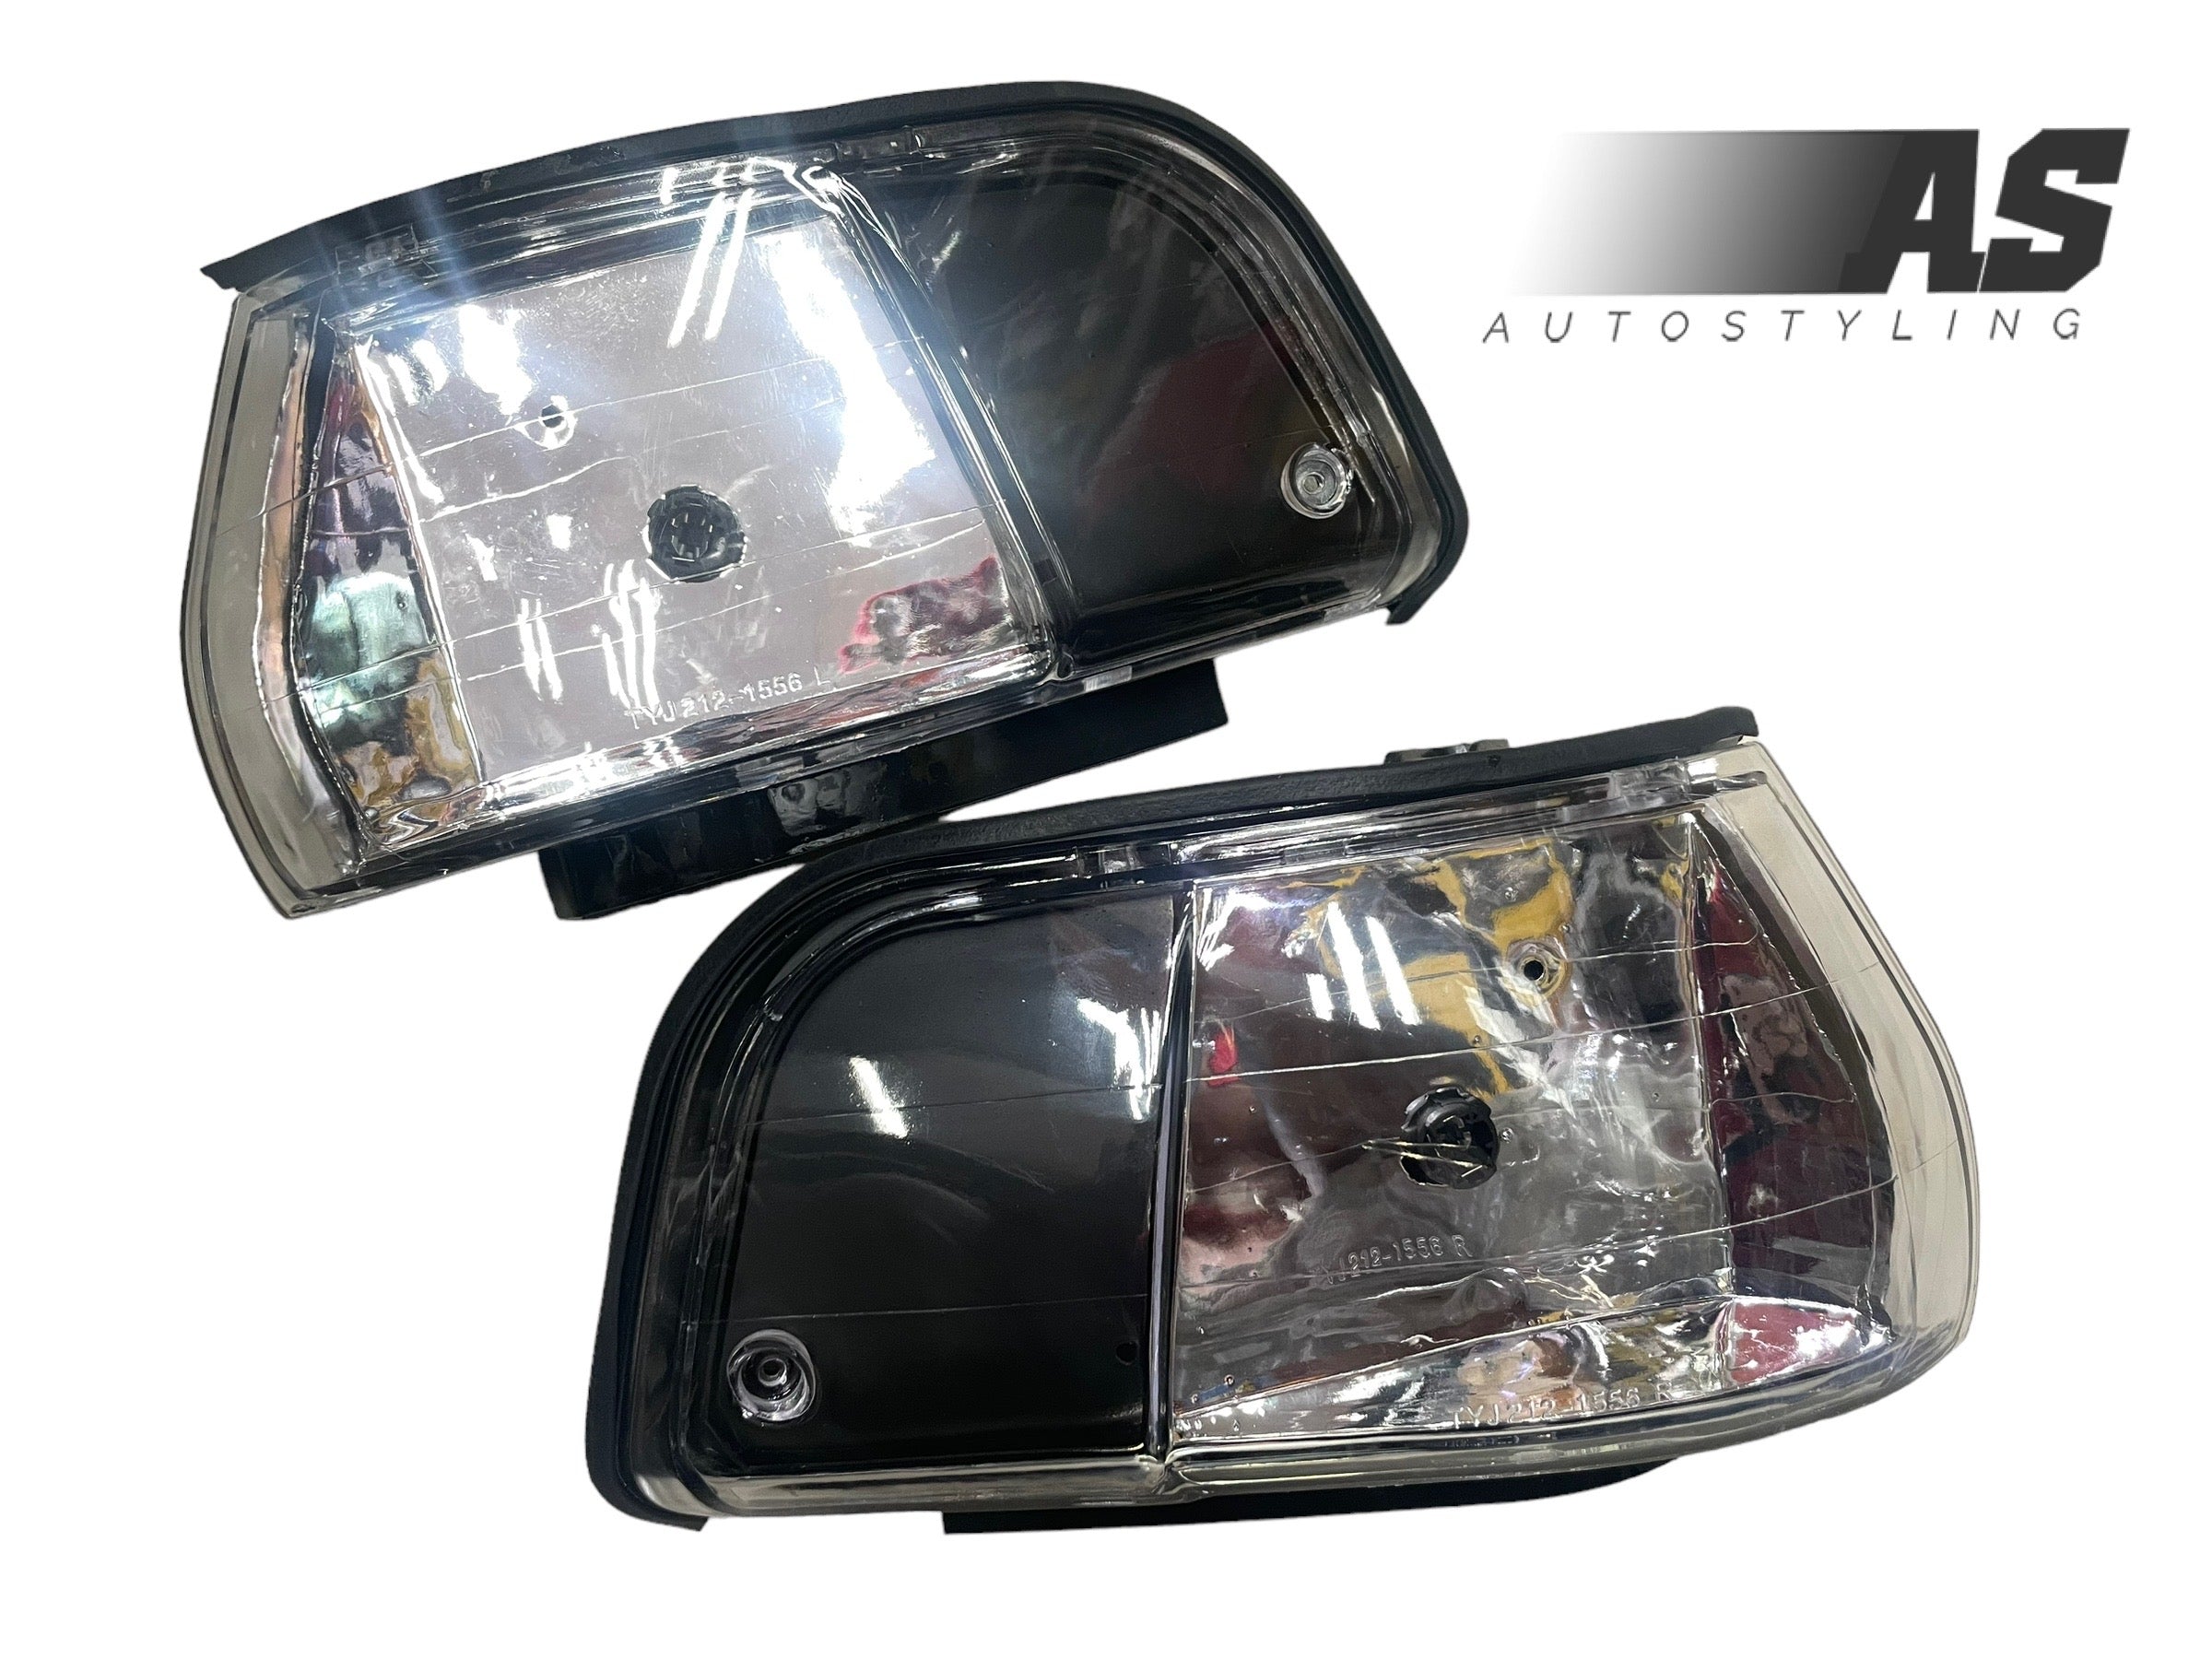 Toyota corolla baby camry  blk/chrome corner lamps sold in pair